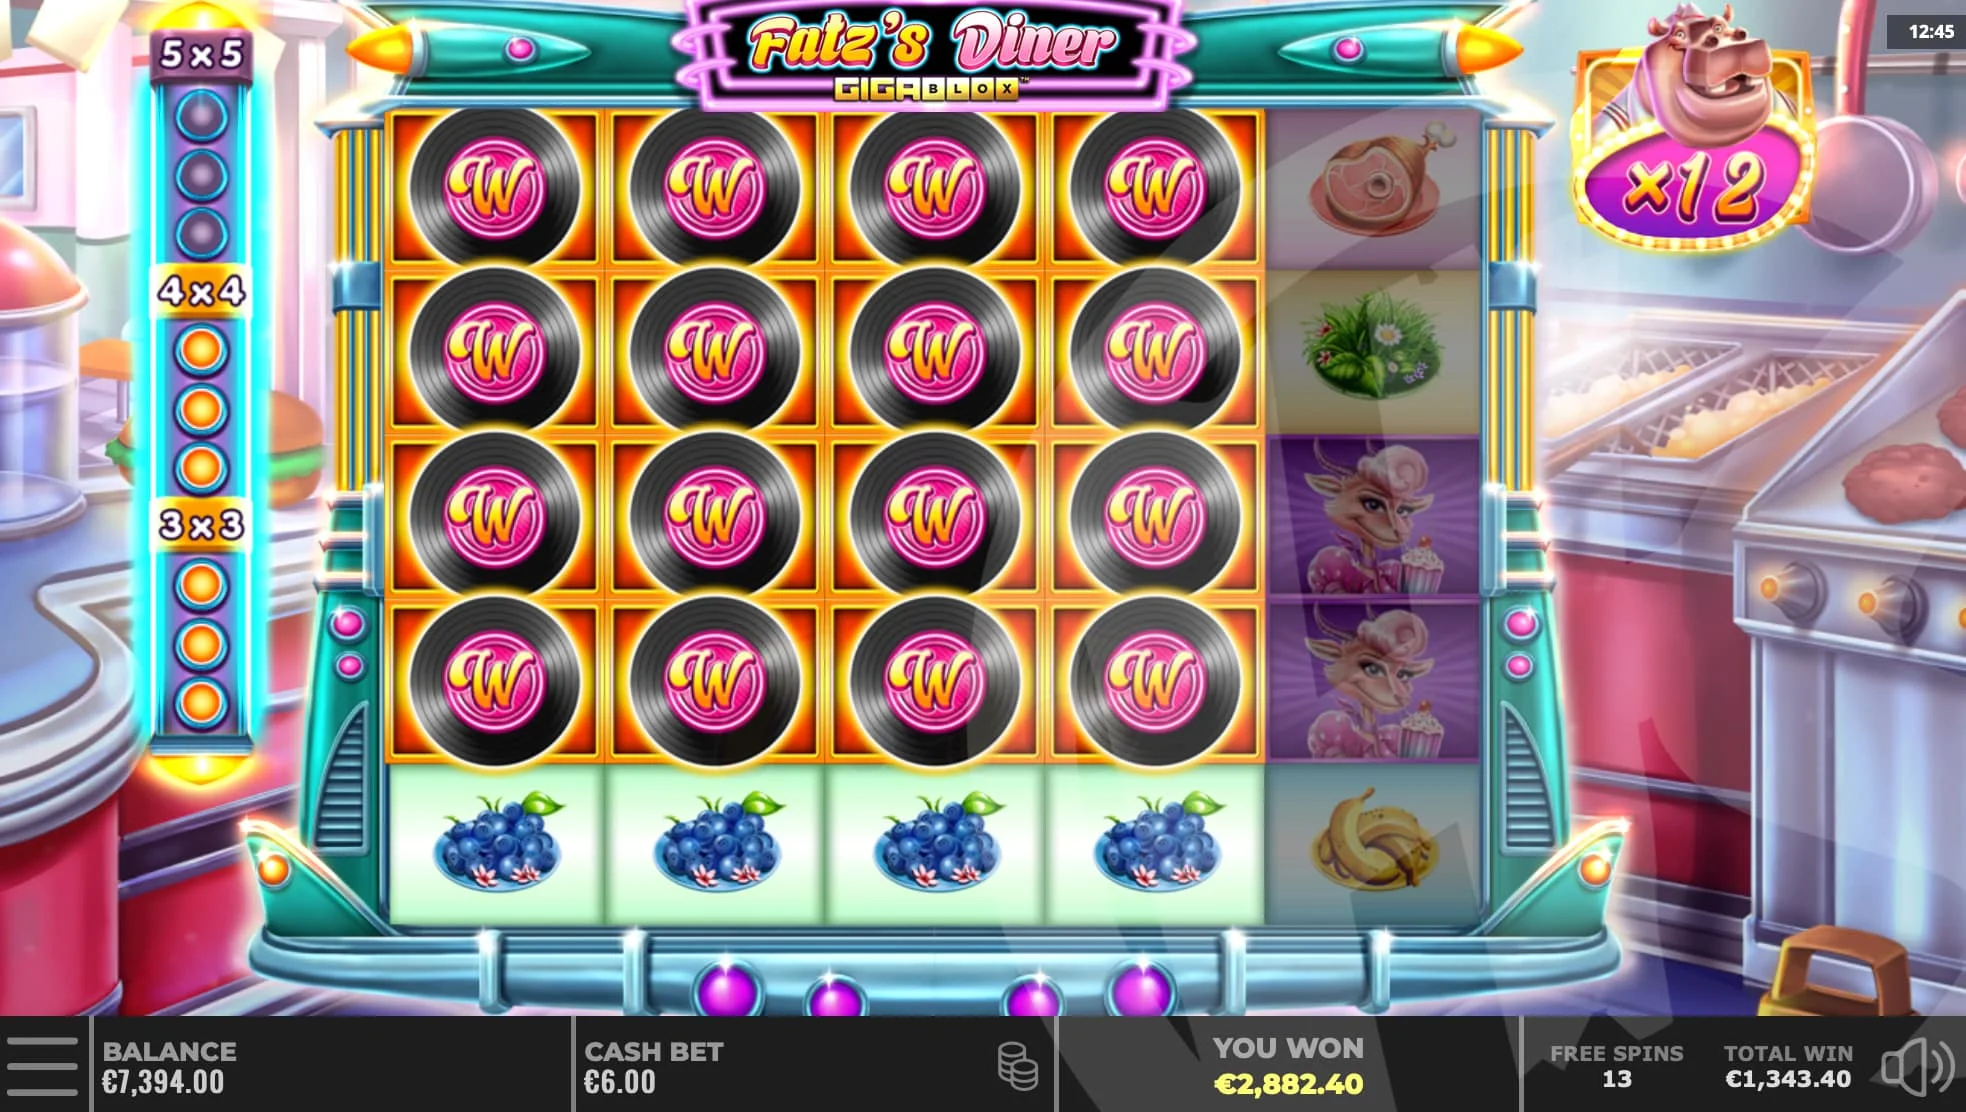 Hippo Multipliers Start at x9 Instead of x3 During Super Free Spins